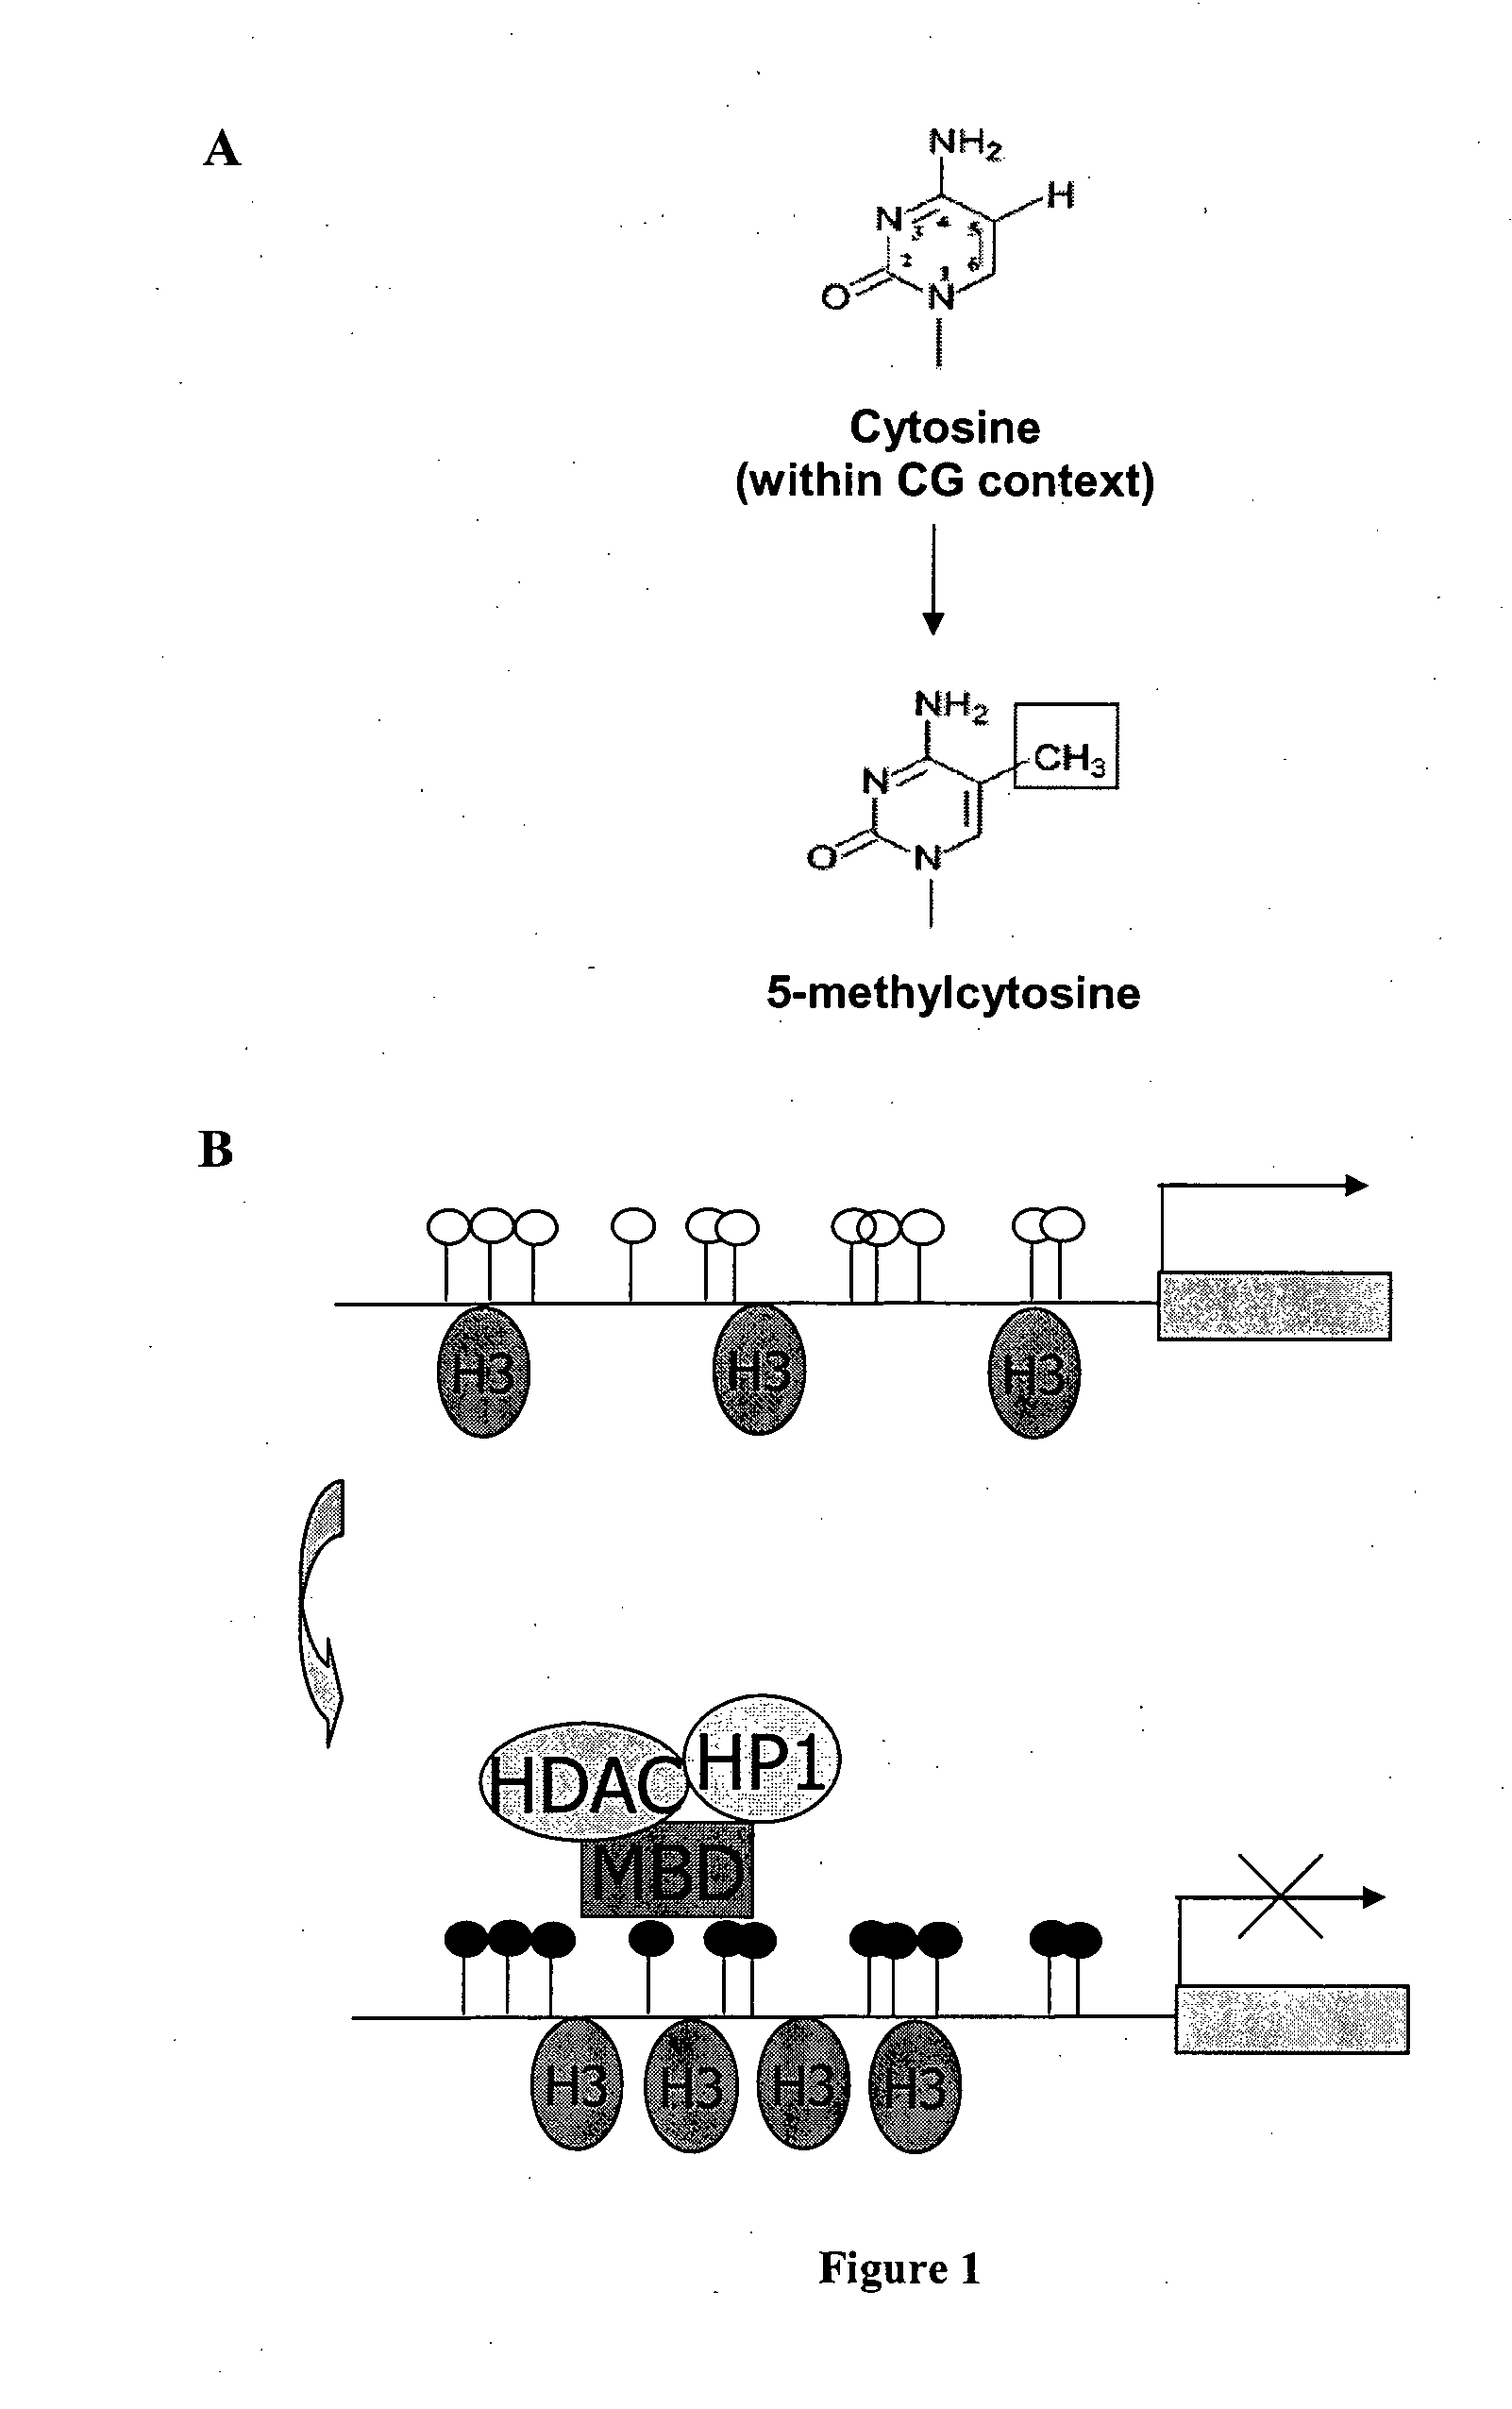 Modified human cmv promoters that are resistant to gene silencing